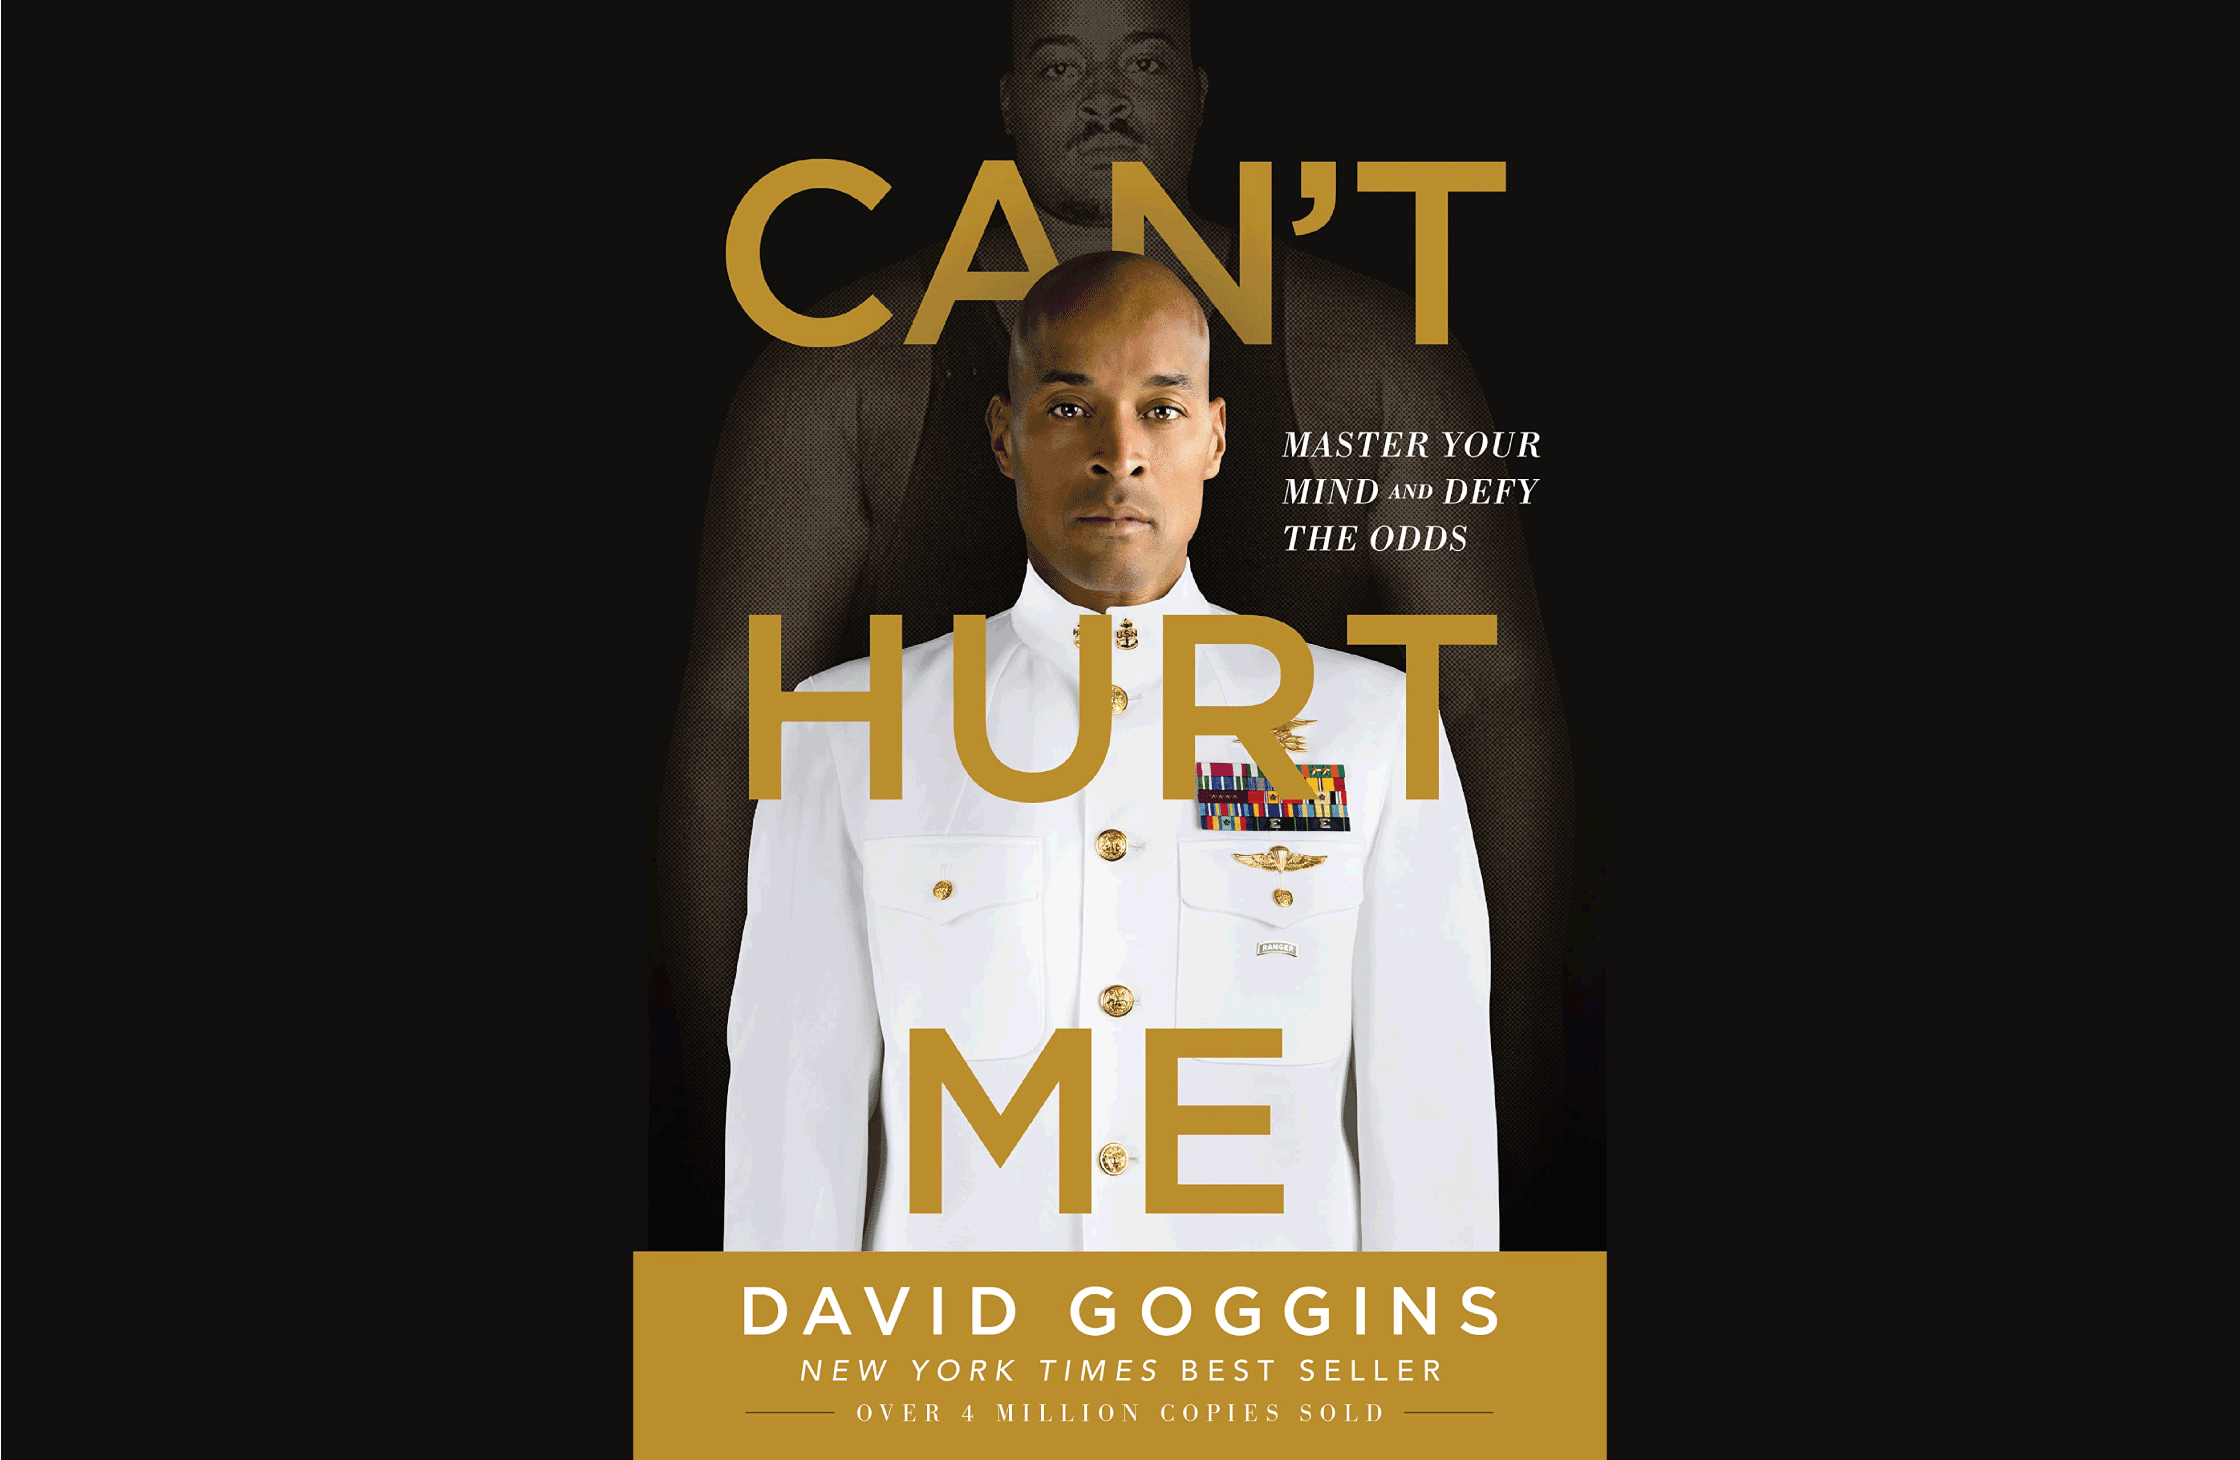 Summary: Can't Hurt Me by David Goggins